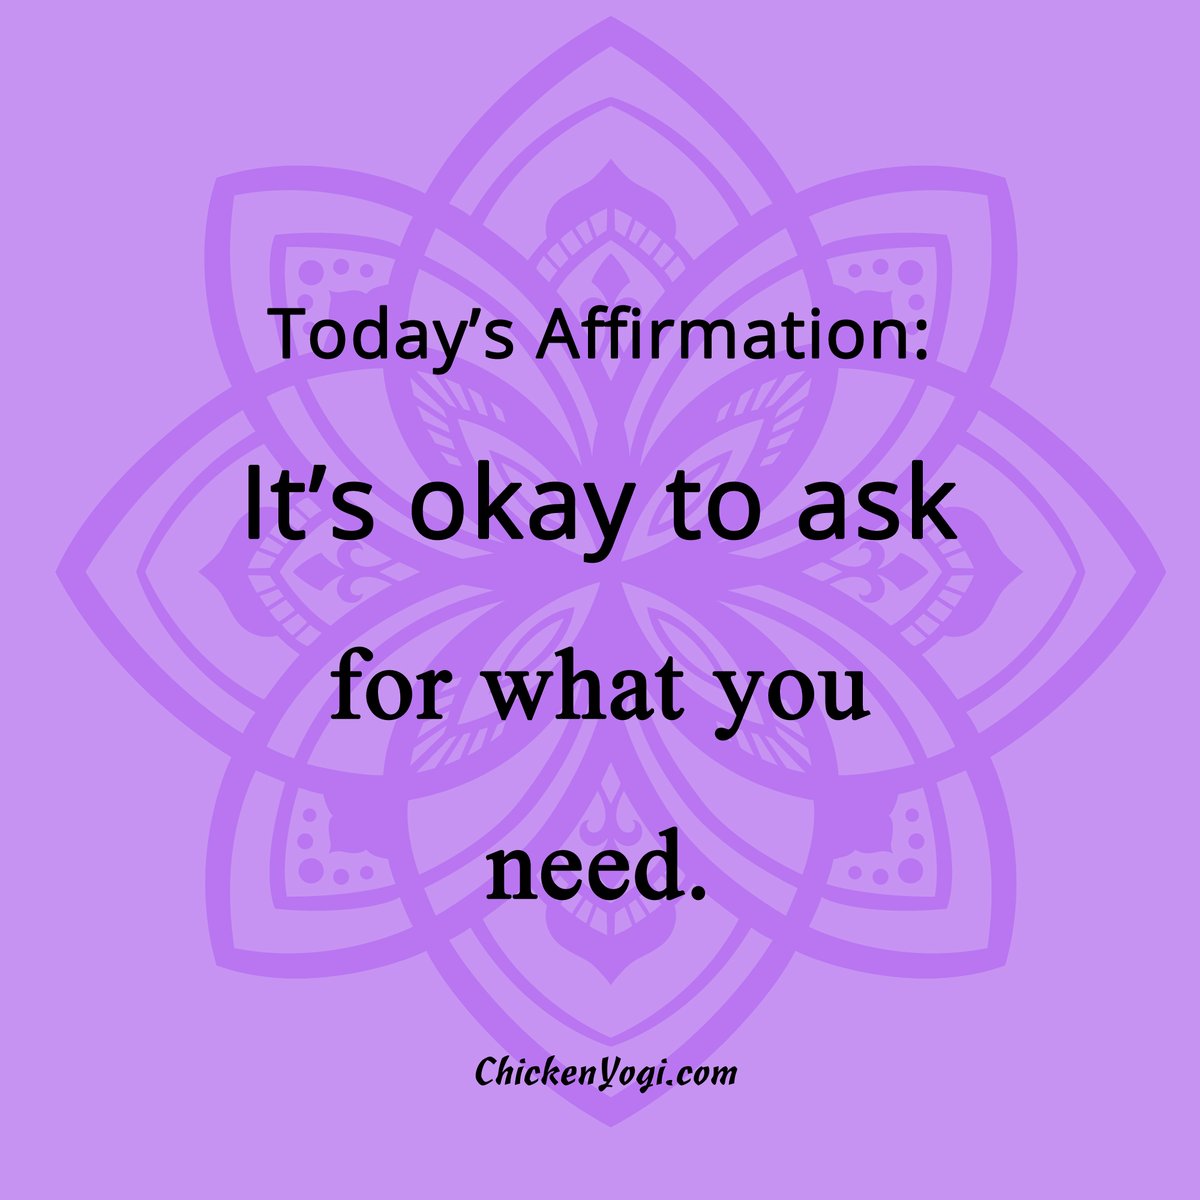 Today's affirmation:It's okay to ask for what you need.

#affirmation #WordsOfWisdom #seekjoy #happiness #ActuallyAutistic #AuDHD #disabled #disability